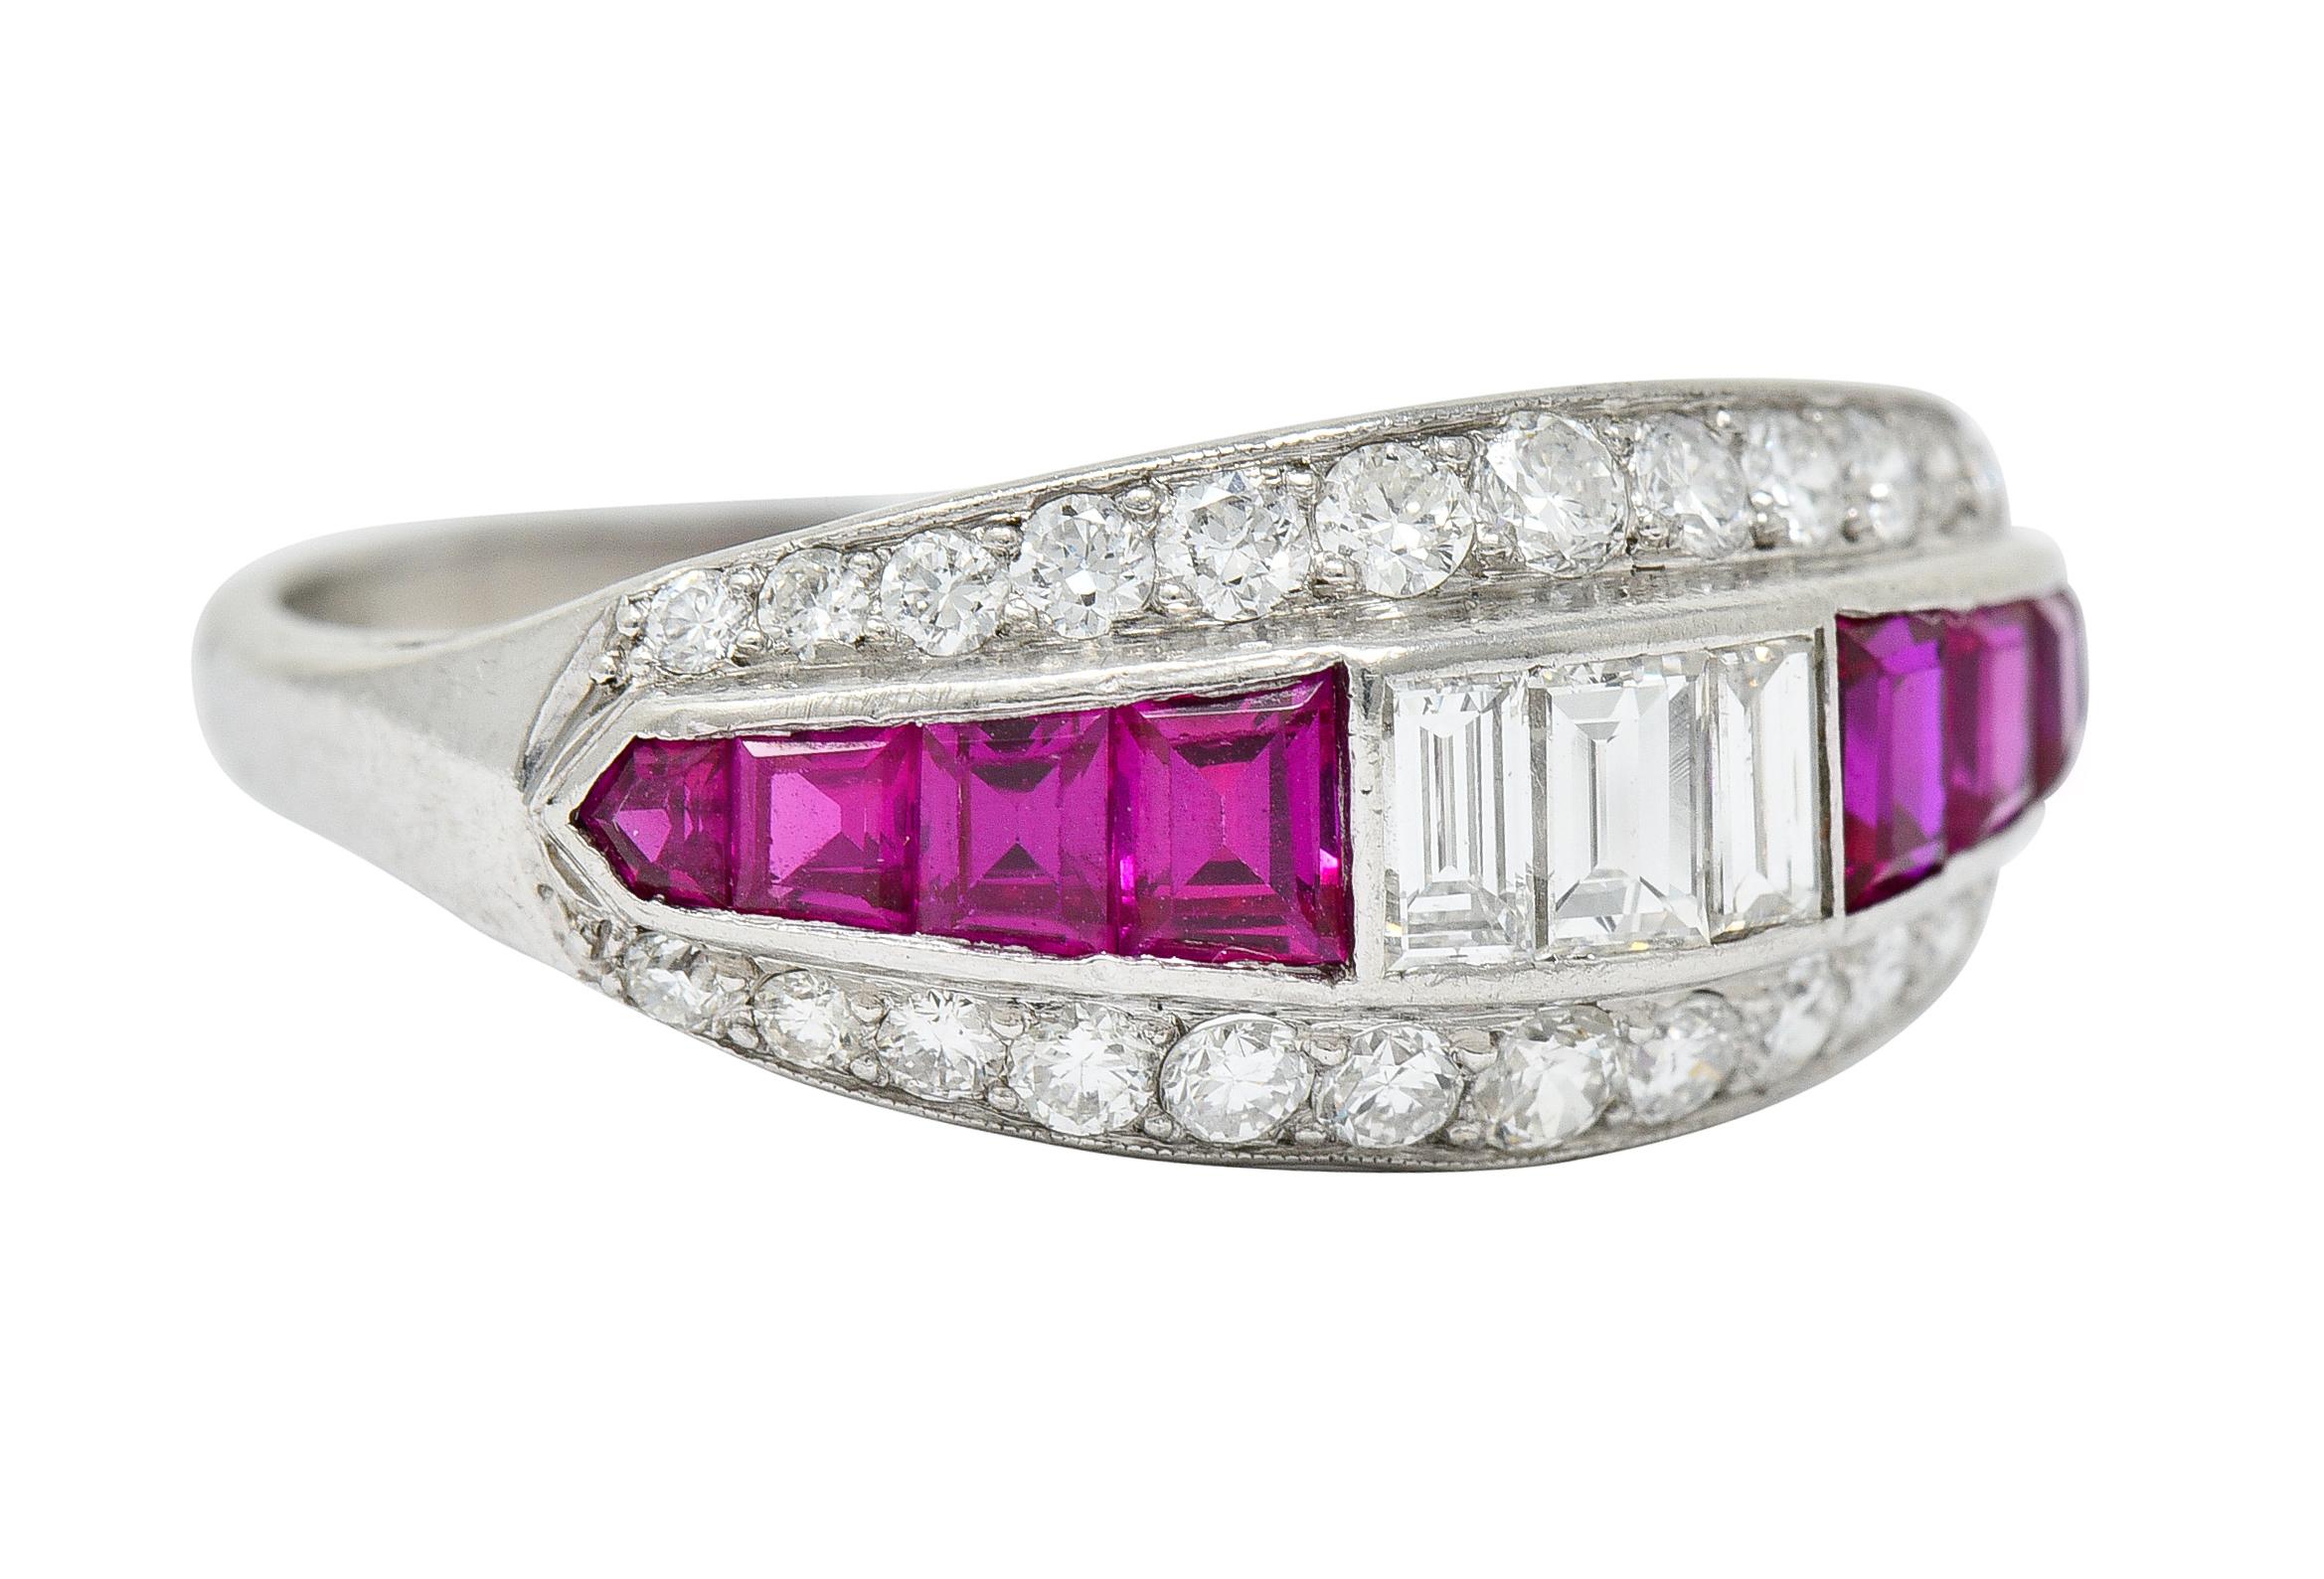 Band ring centers a row of channel set baguette cut diamonds flanked by calibré cut rubies

Flanked North and South by two rows of round brilliant cut diamonds - graduating in size

Rubies very well matched purplish red color while weighing